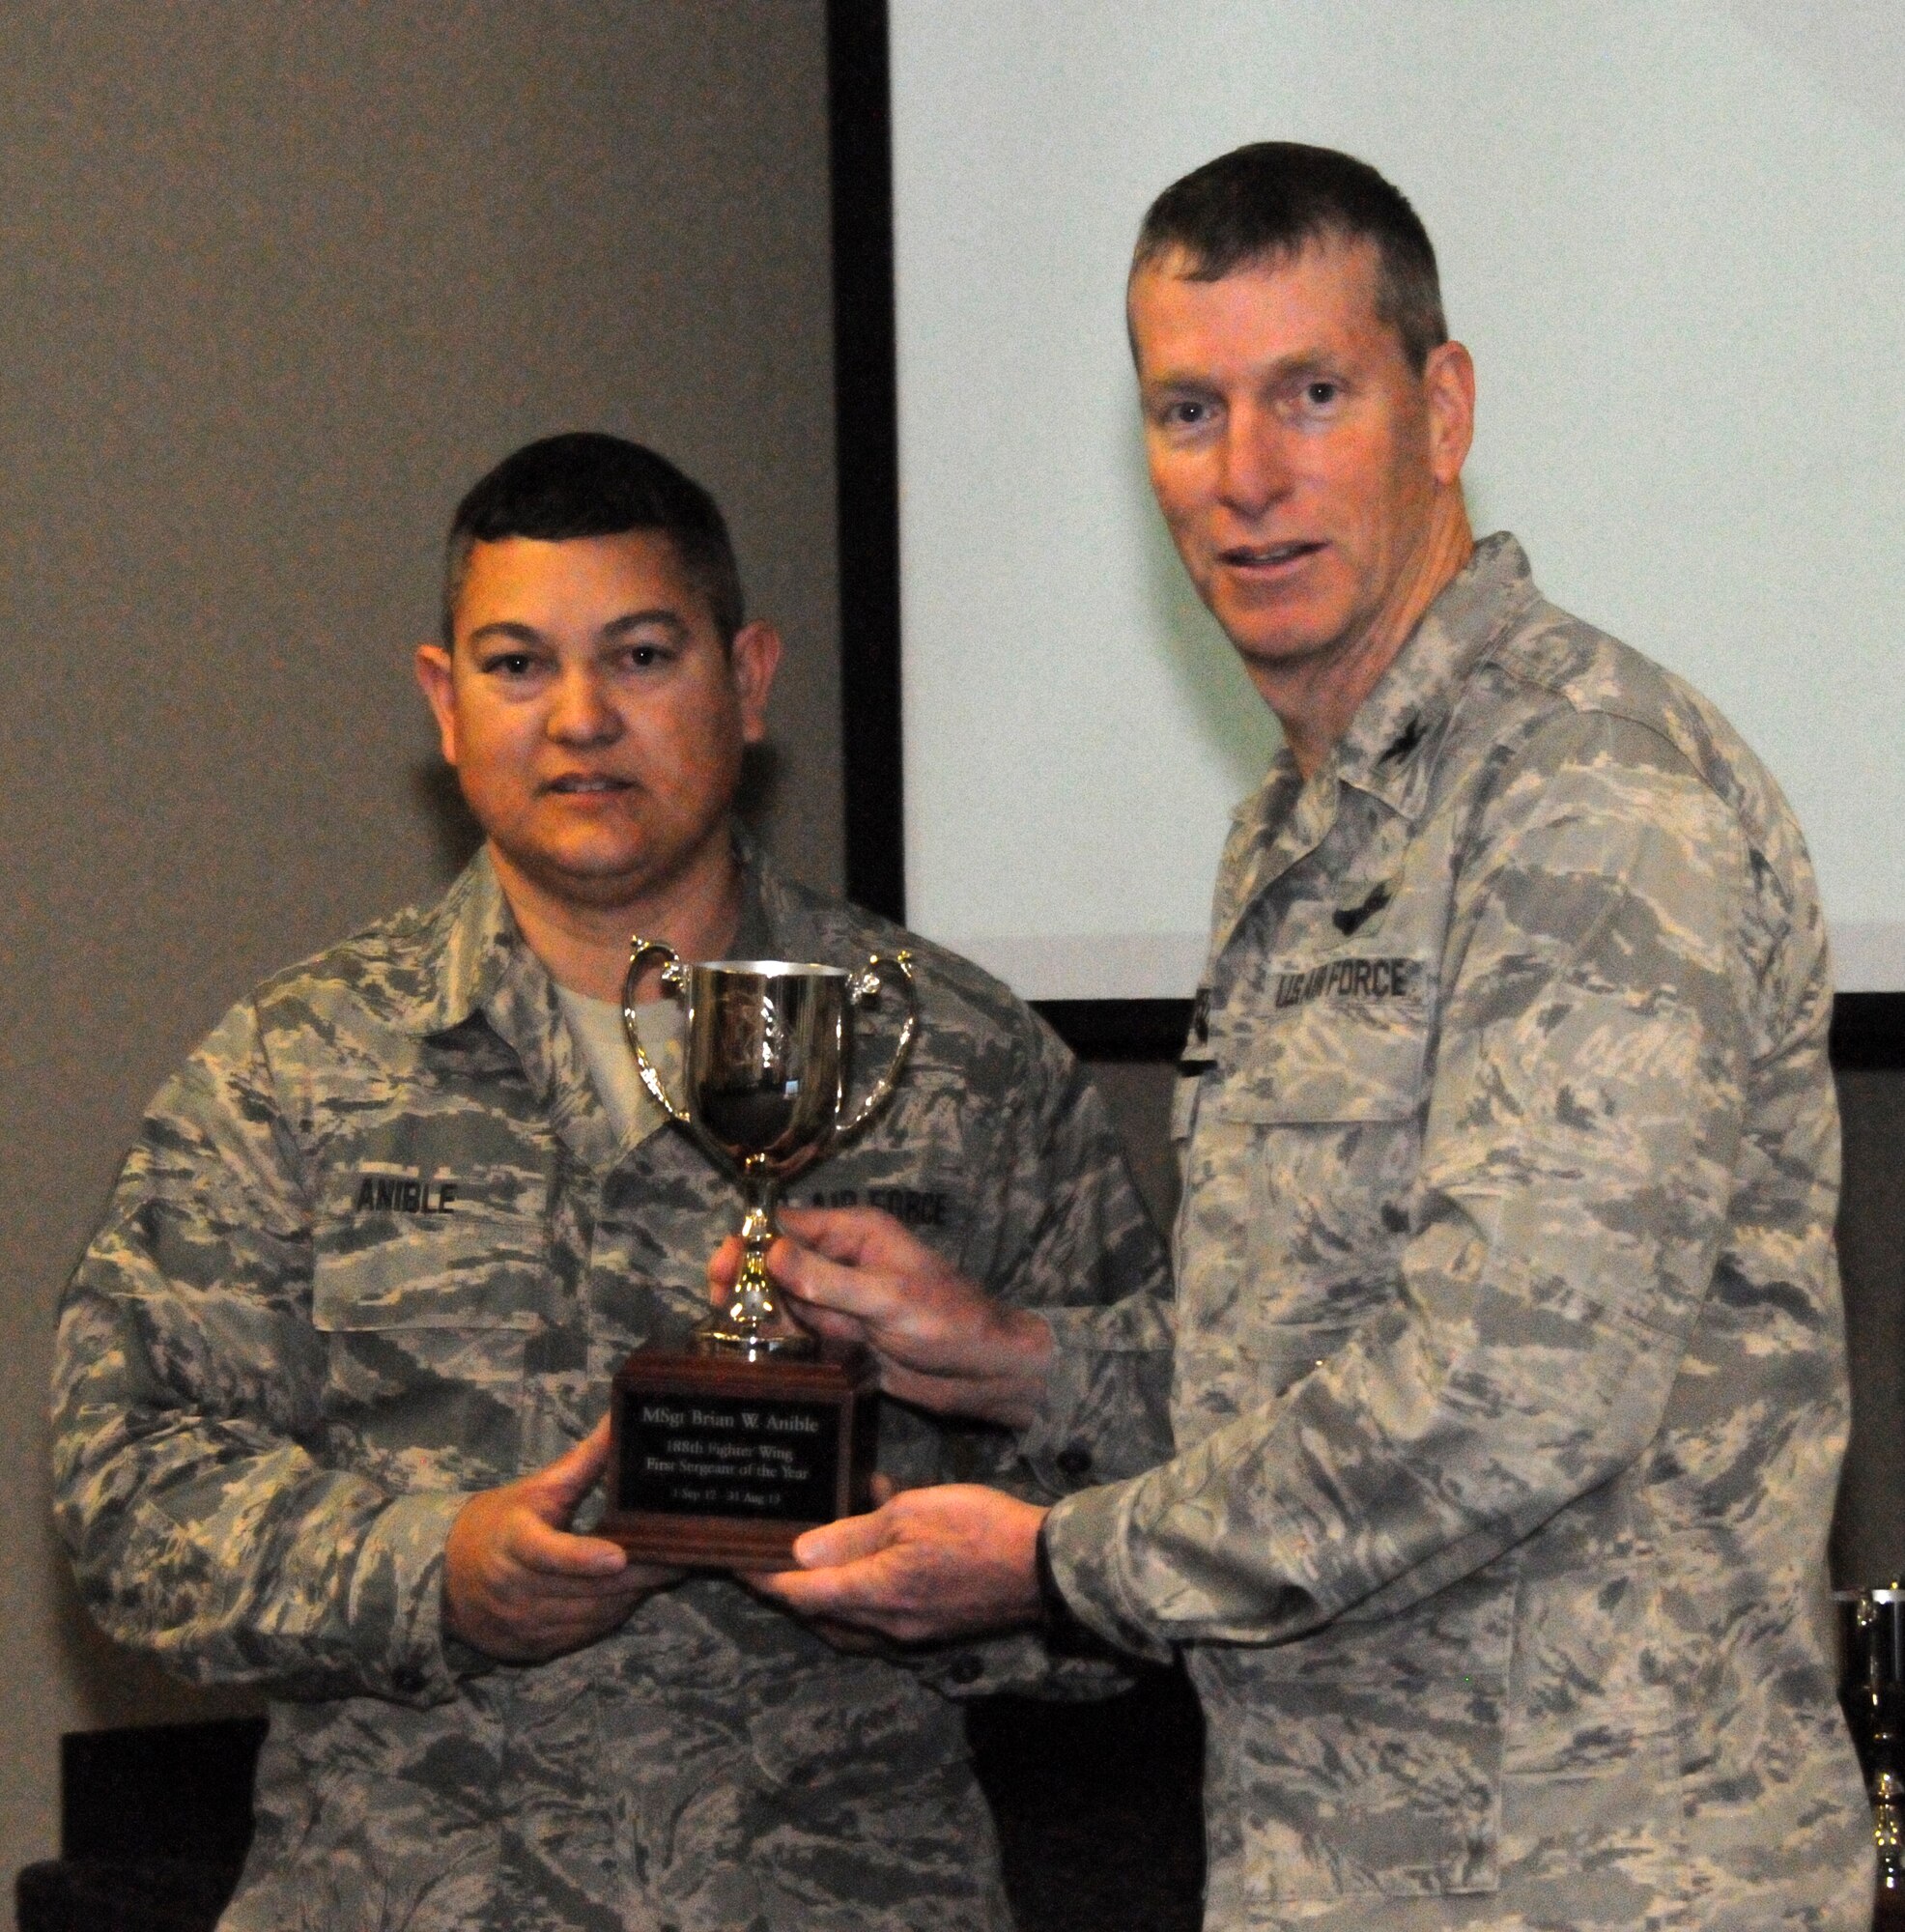 Col. Mark Anderson, 188th Fighter Wing commander, right, presents the 188th Outstanding First Sergeant of the Year award to Master Sgt. Brian Anible of the 188th Mission Support Group during a commander’s call presentation Feb. 8, 2014. (U.S. Air National Guard photo by Airman 1st Class Cody Martin)